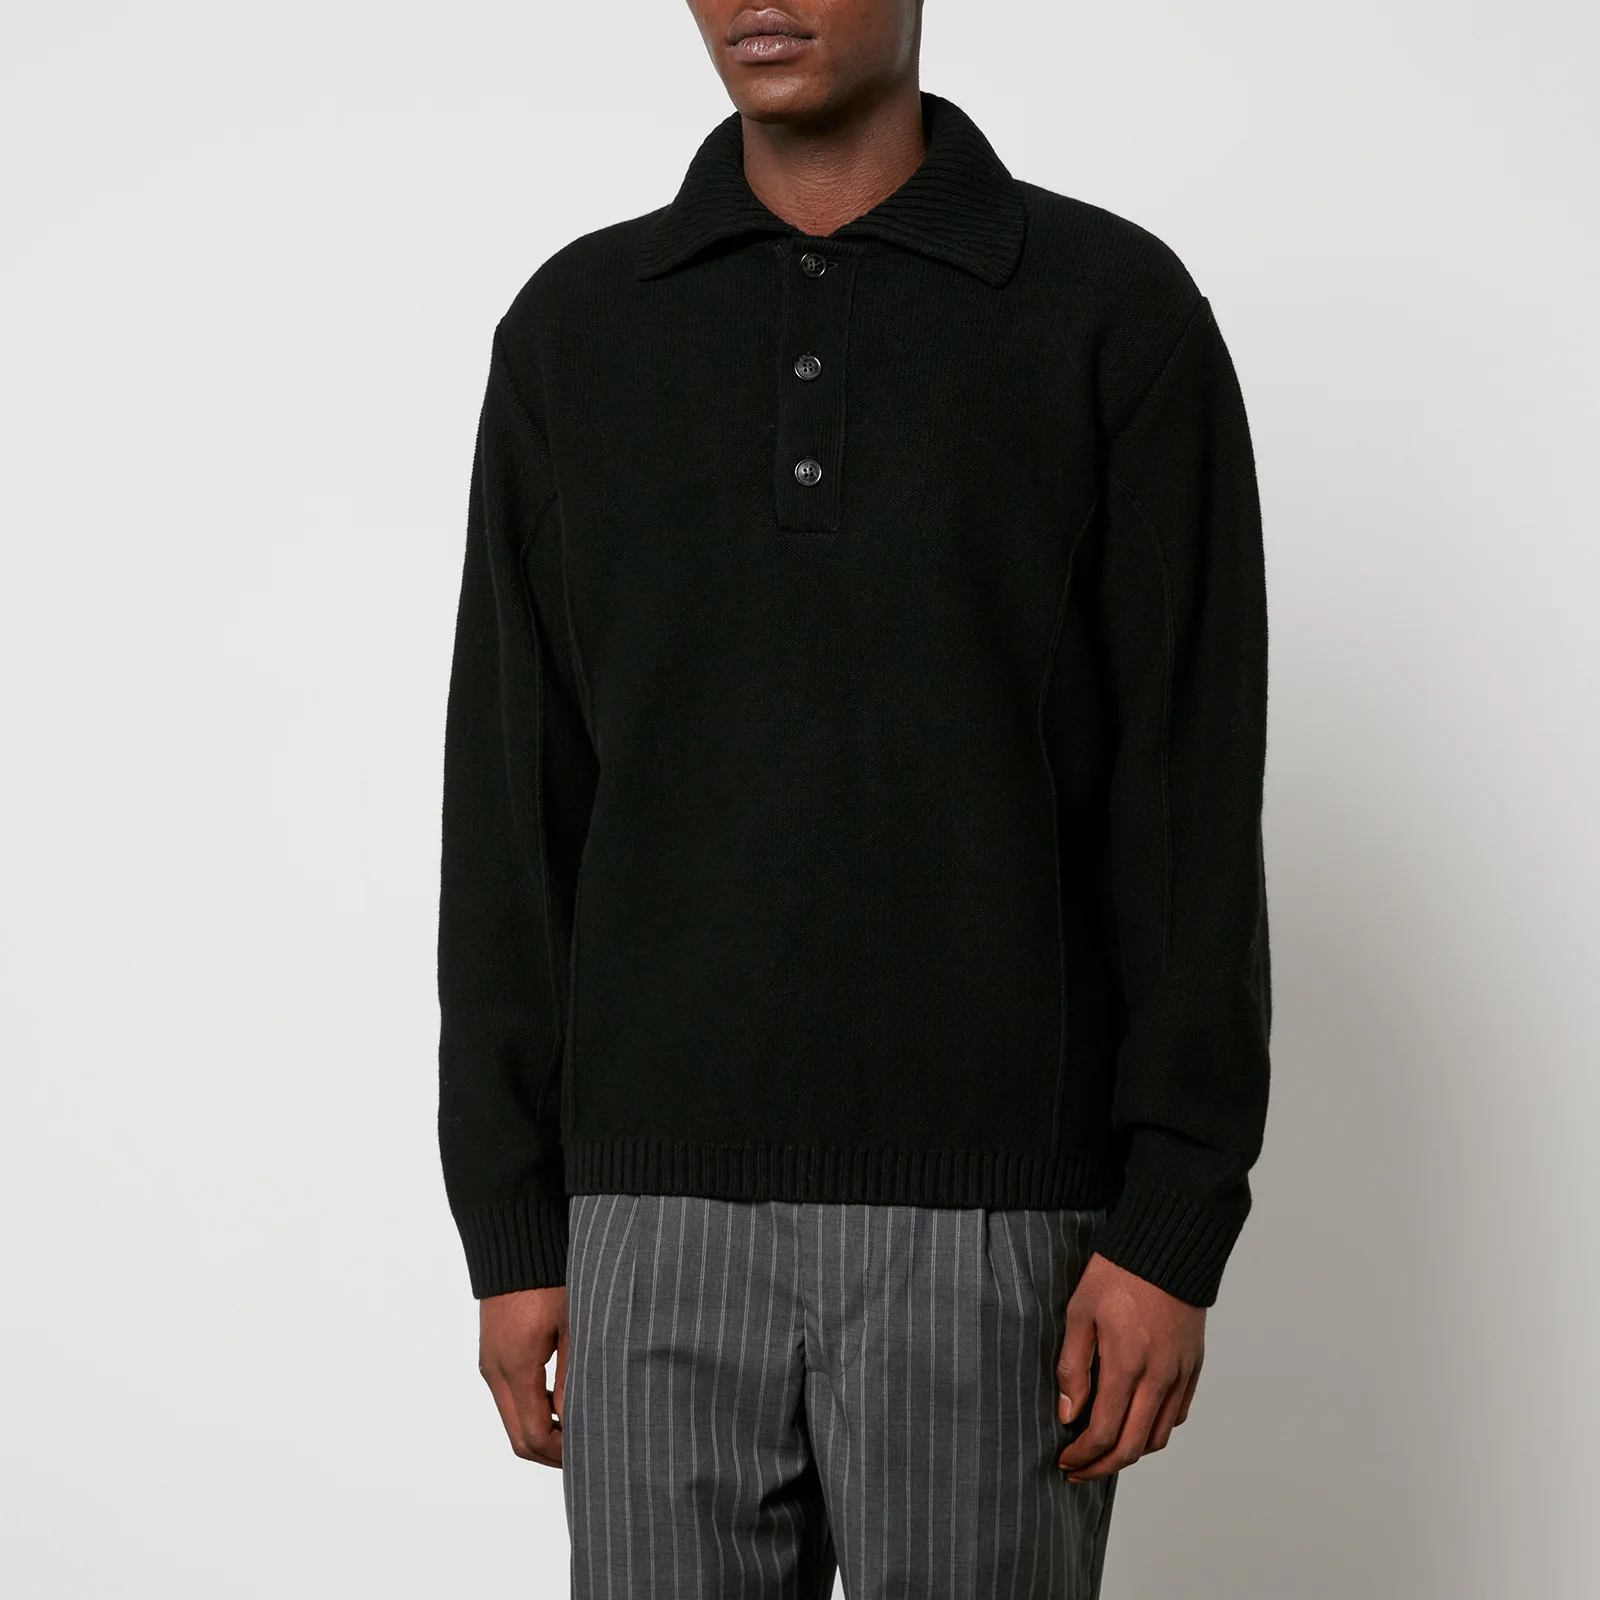 mfpen Company Recycled Wool Polo Jumper Image 1